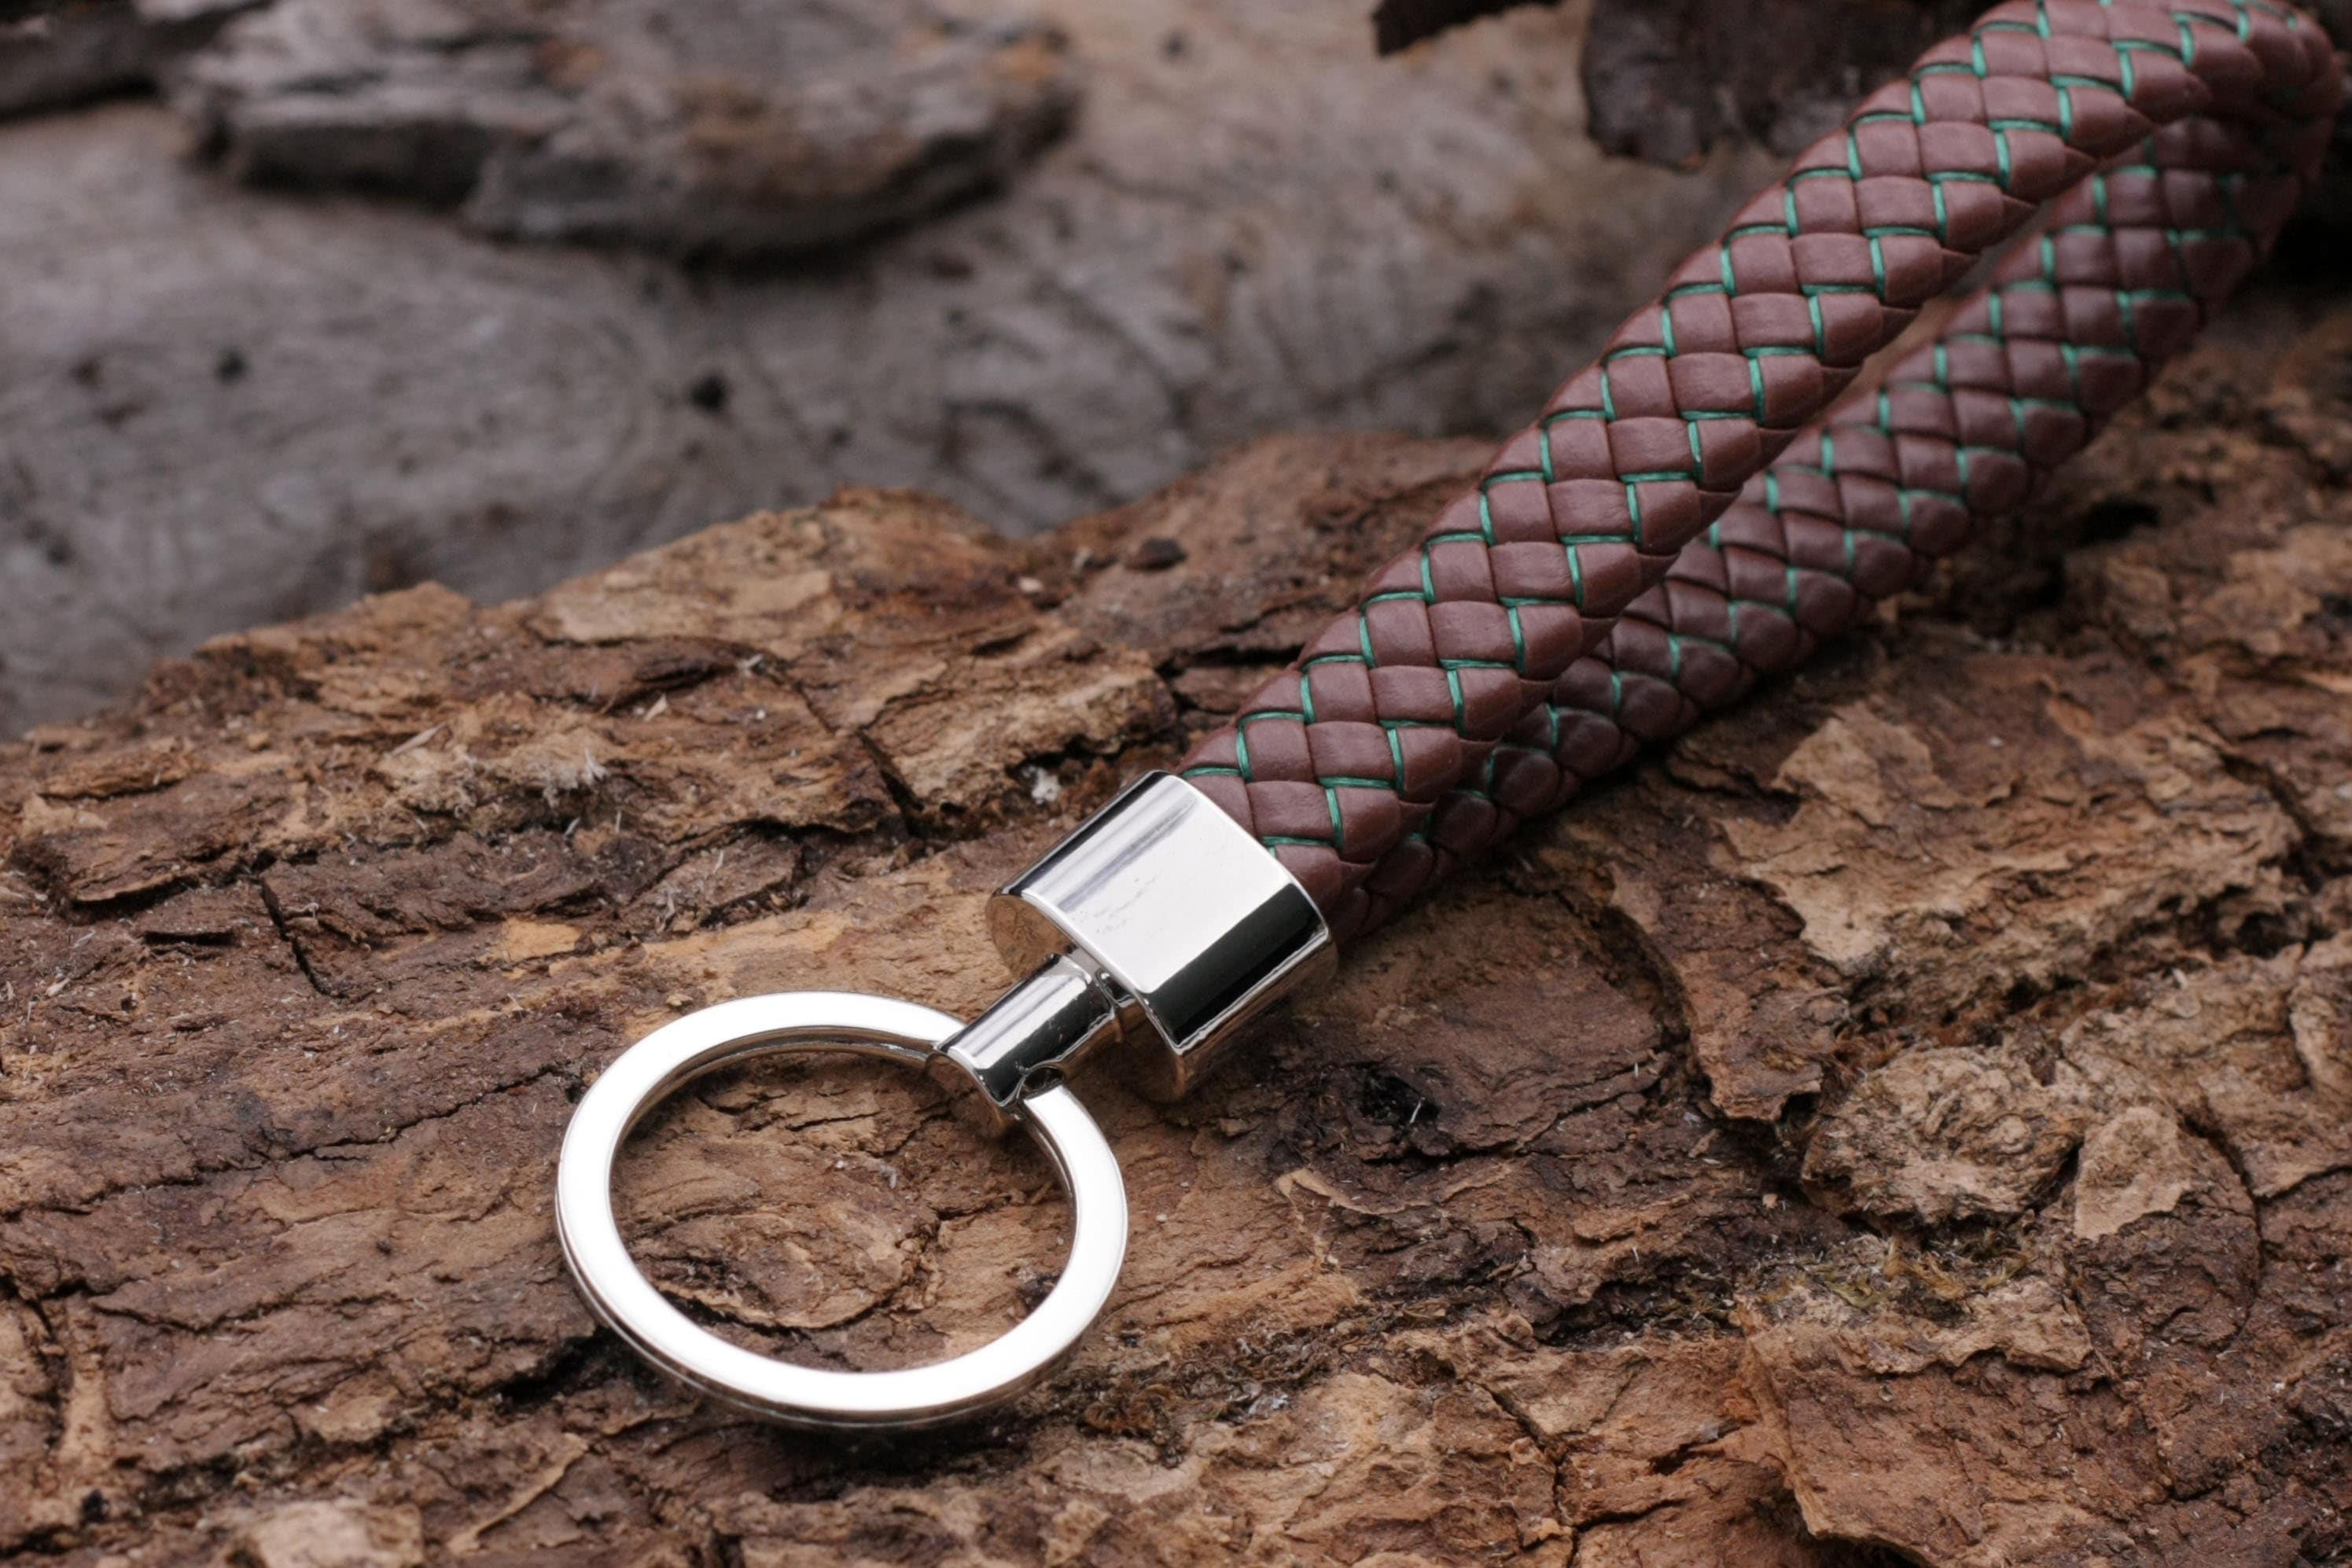 Key Rings made handmade from natural sustainable materials, leather